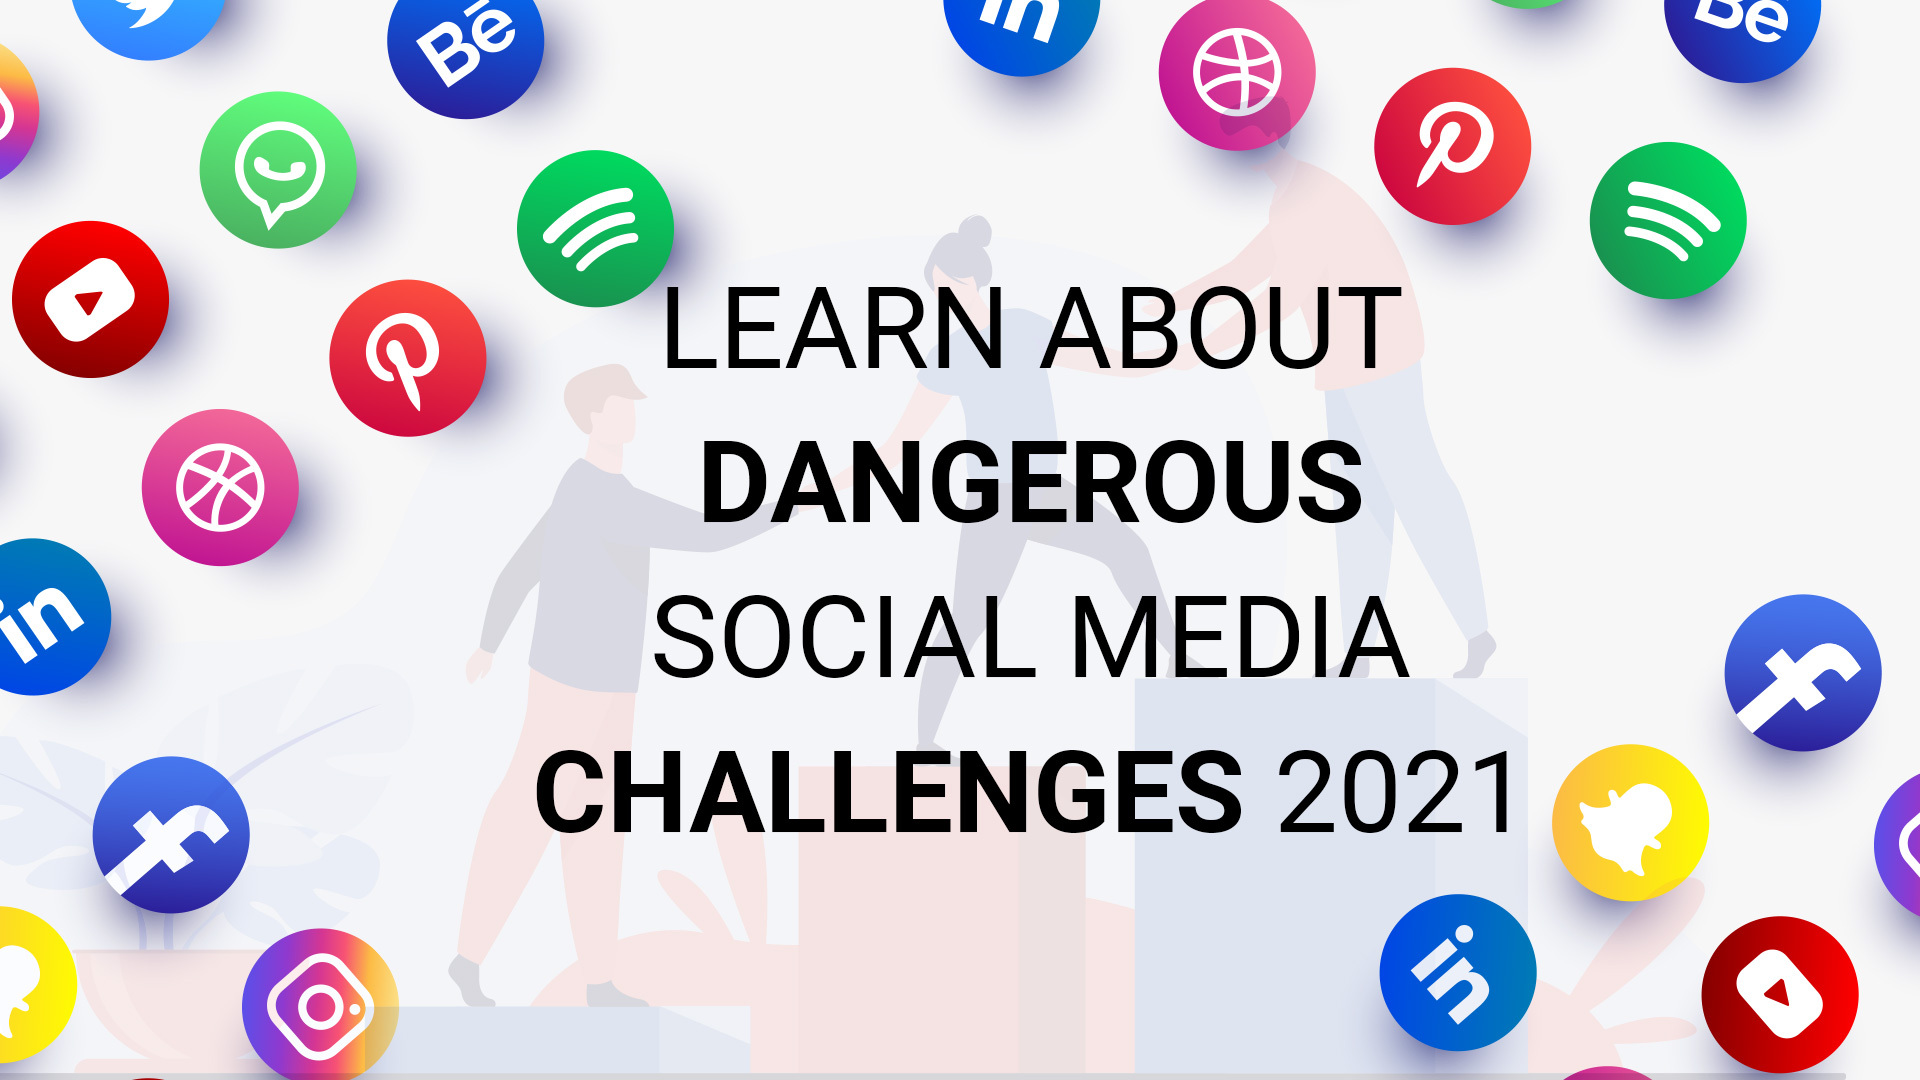 Learn About Dangerous Social Media Challenges 2021 & How to Get Ready for It?